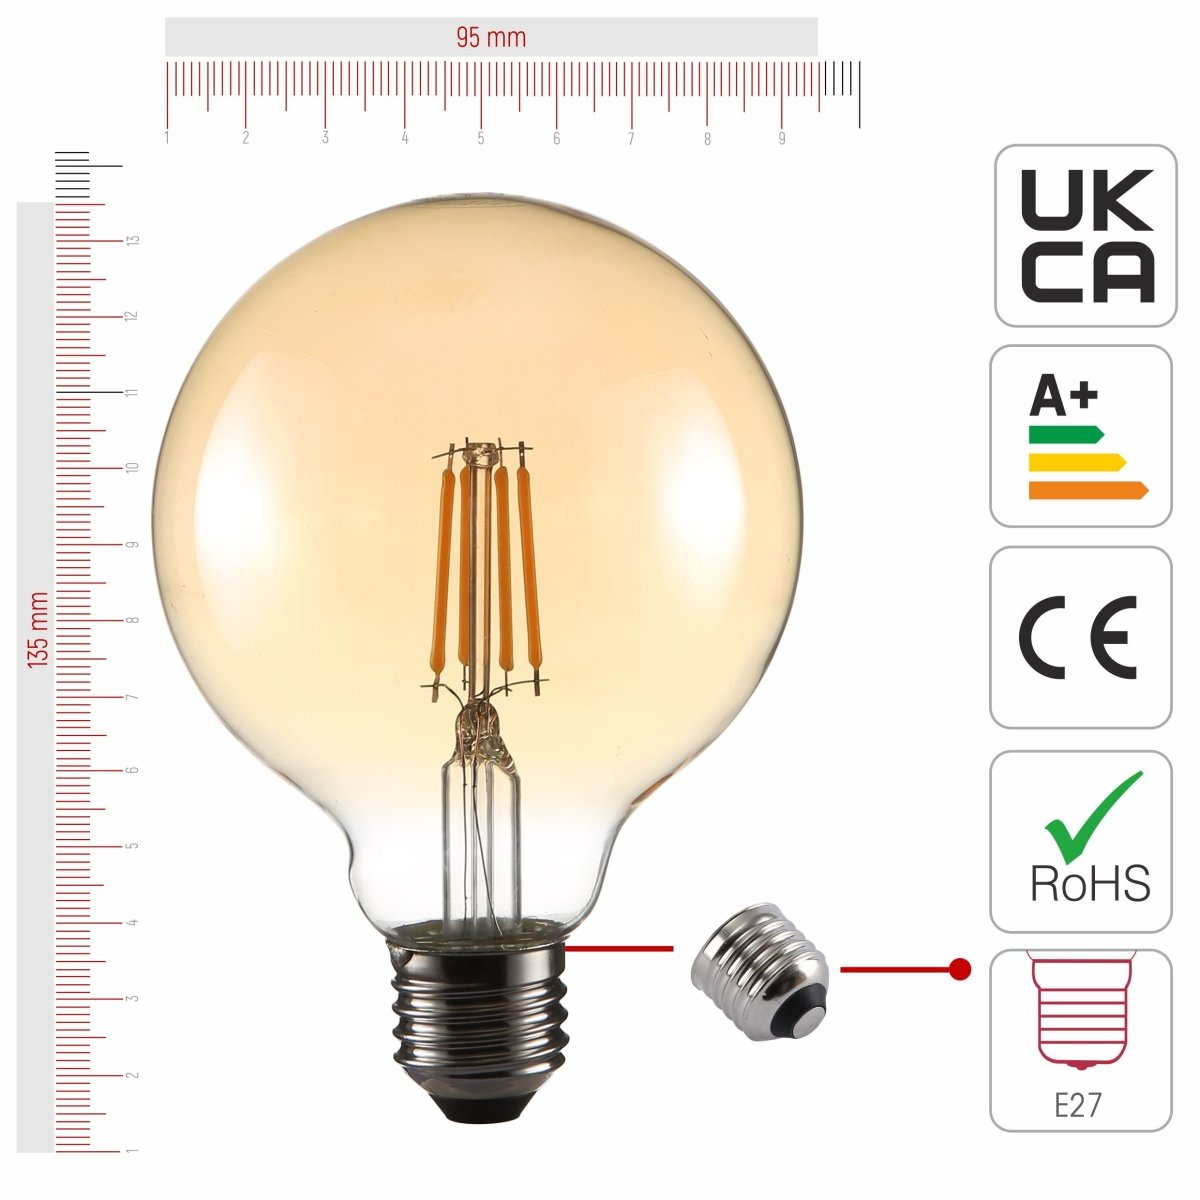 Size and certifications of LED Filament Bulb G95 Globe E27 Edison Screw 4W 410lm Warm White 2400K Amber